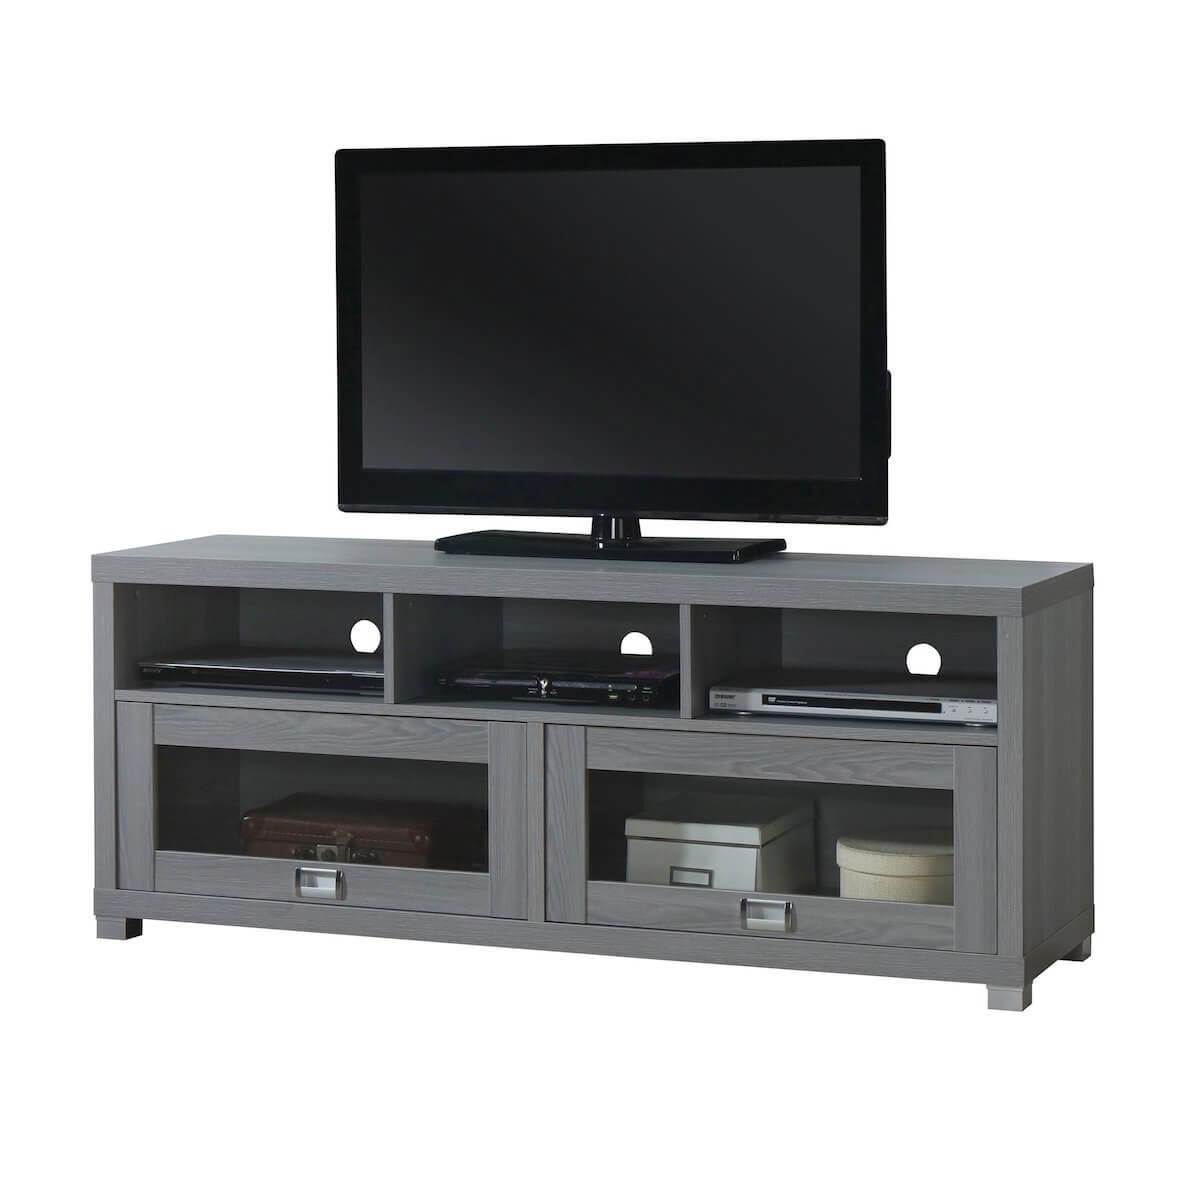 Techni Mobili Gray Durbin TV Stand for TVs up to 65" RTA-8850-GRY with TV